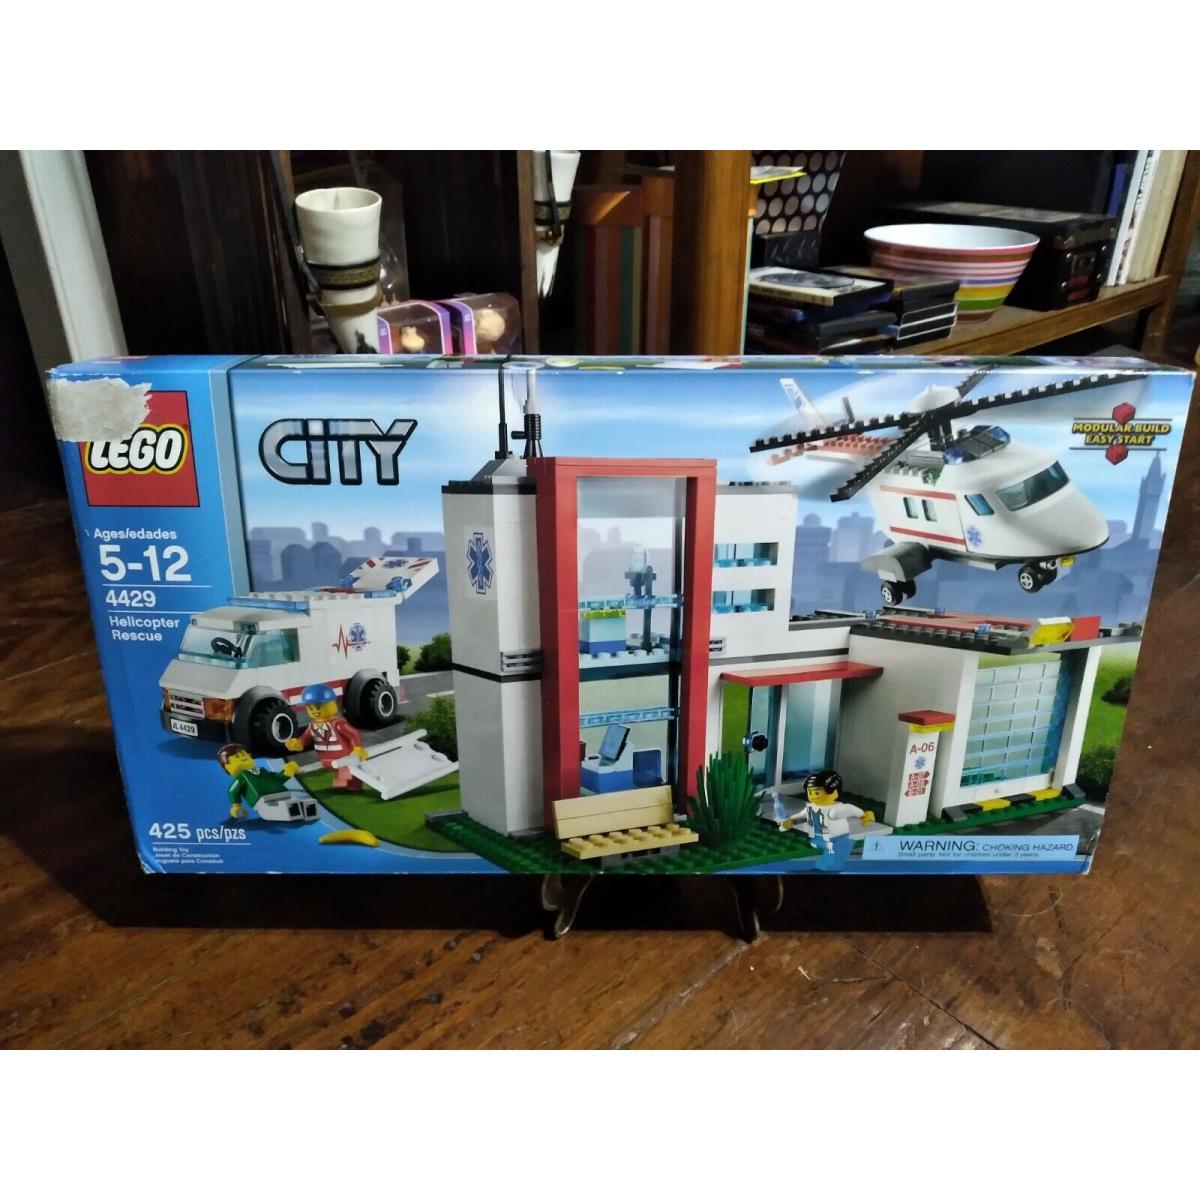 Lego City 4429 Helicopter Rescue Building Set - 425 Piece - - Retired